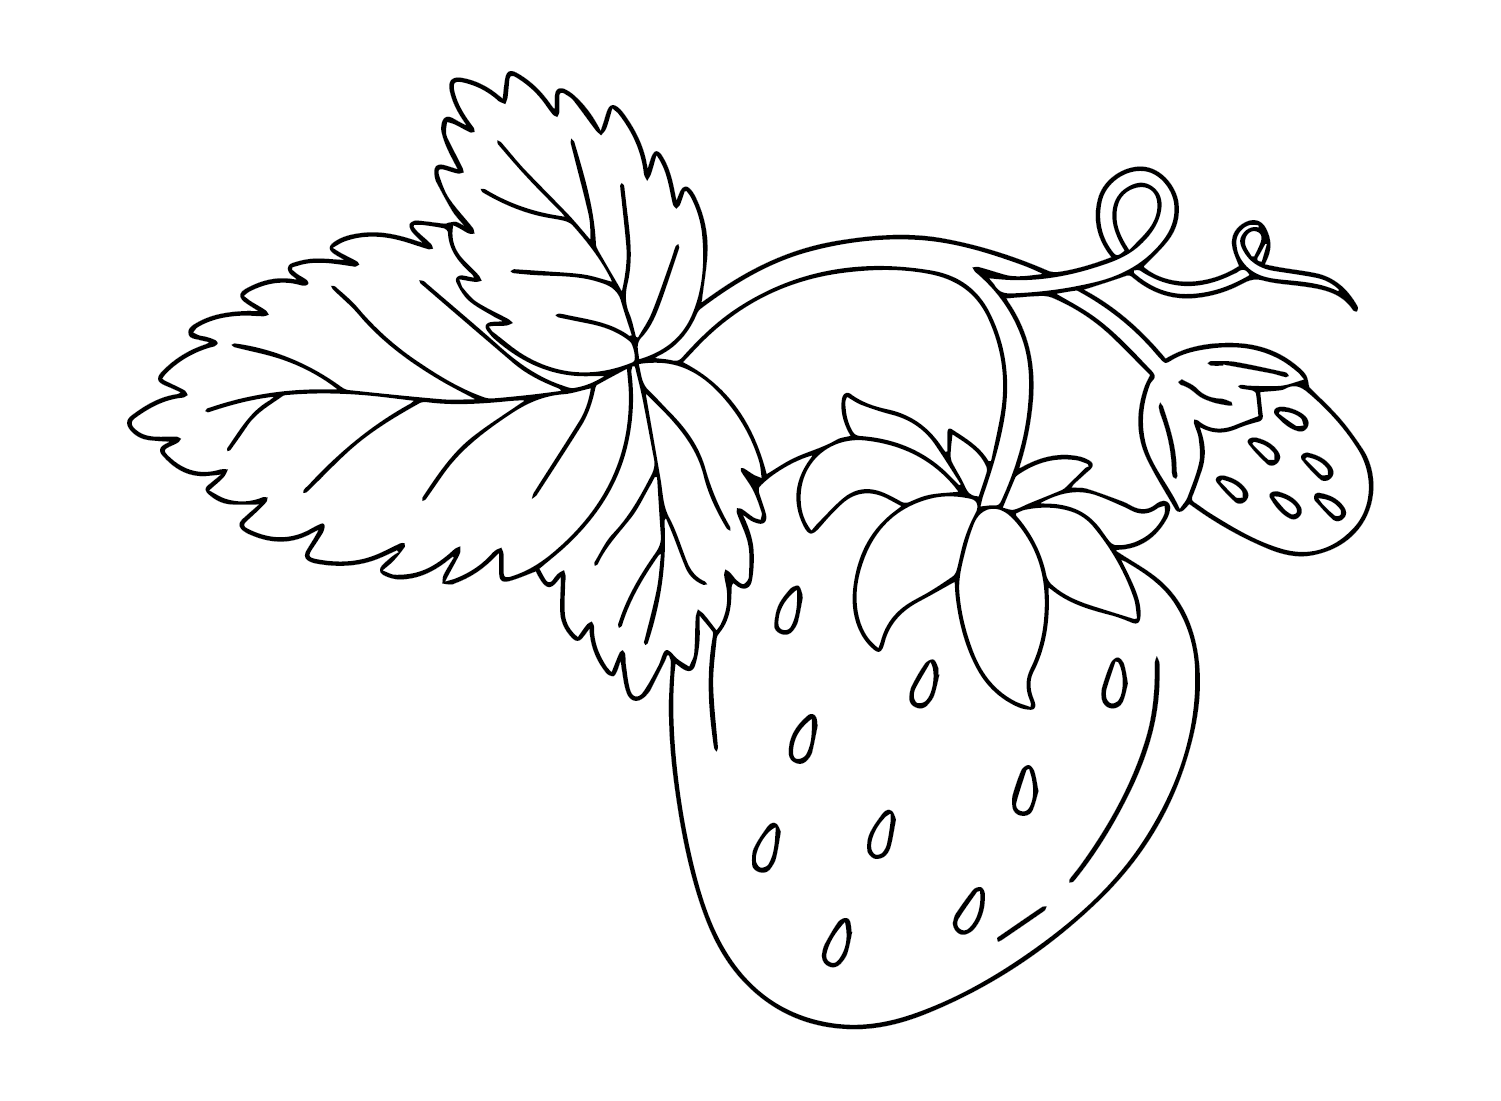 Strawberry Coloring Pages - Coloring Pages For Kids And Adults